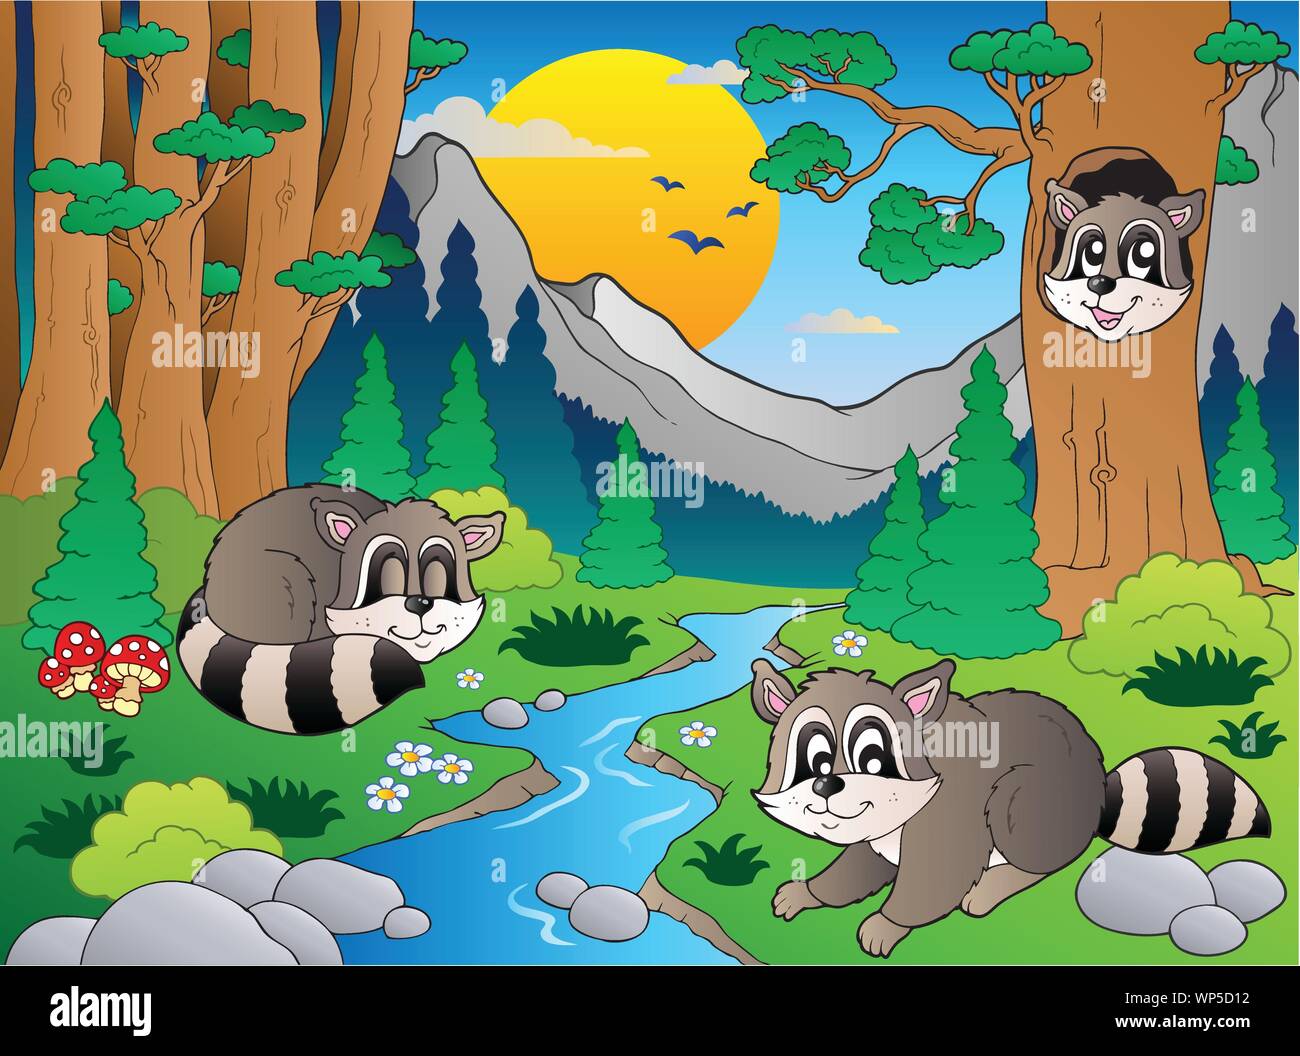 Forest scene with various animals 6 Stock Vector